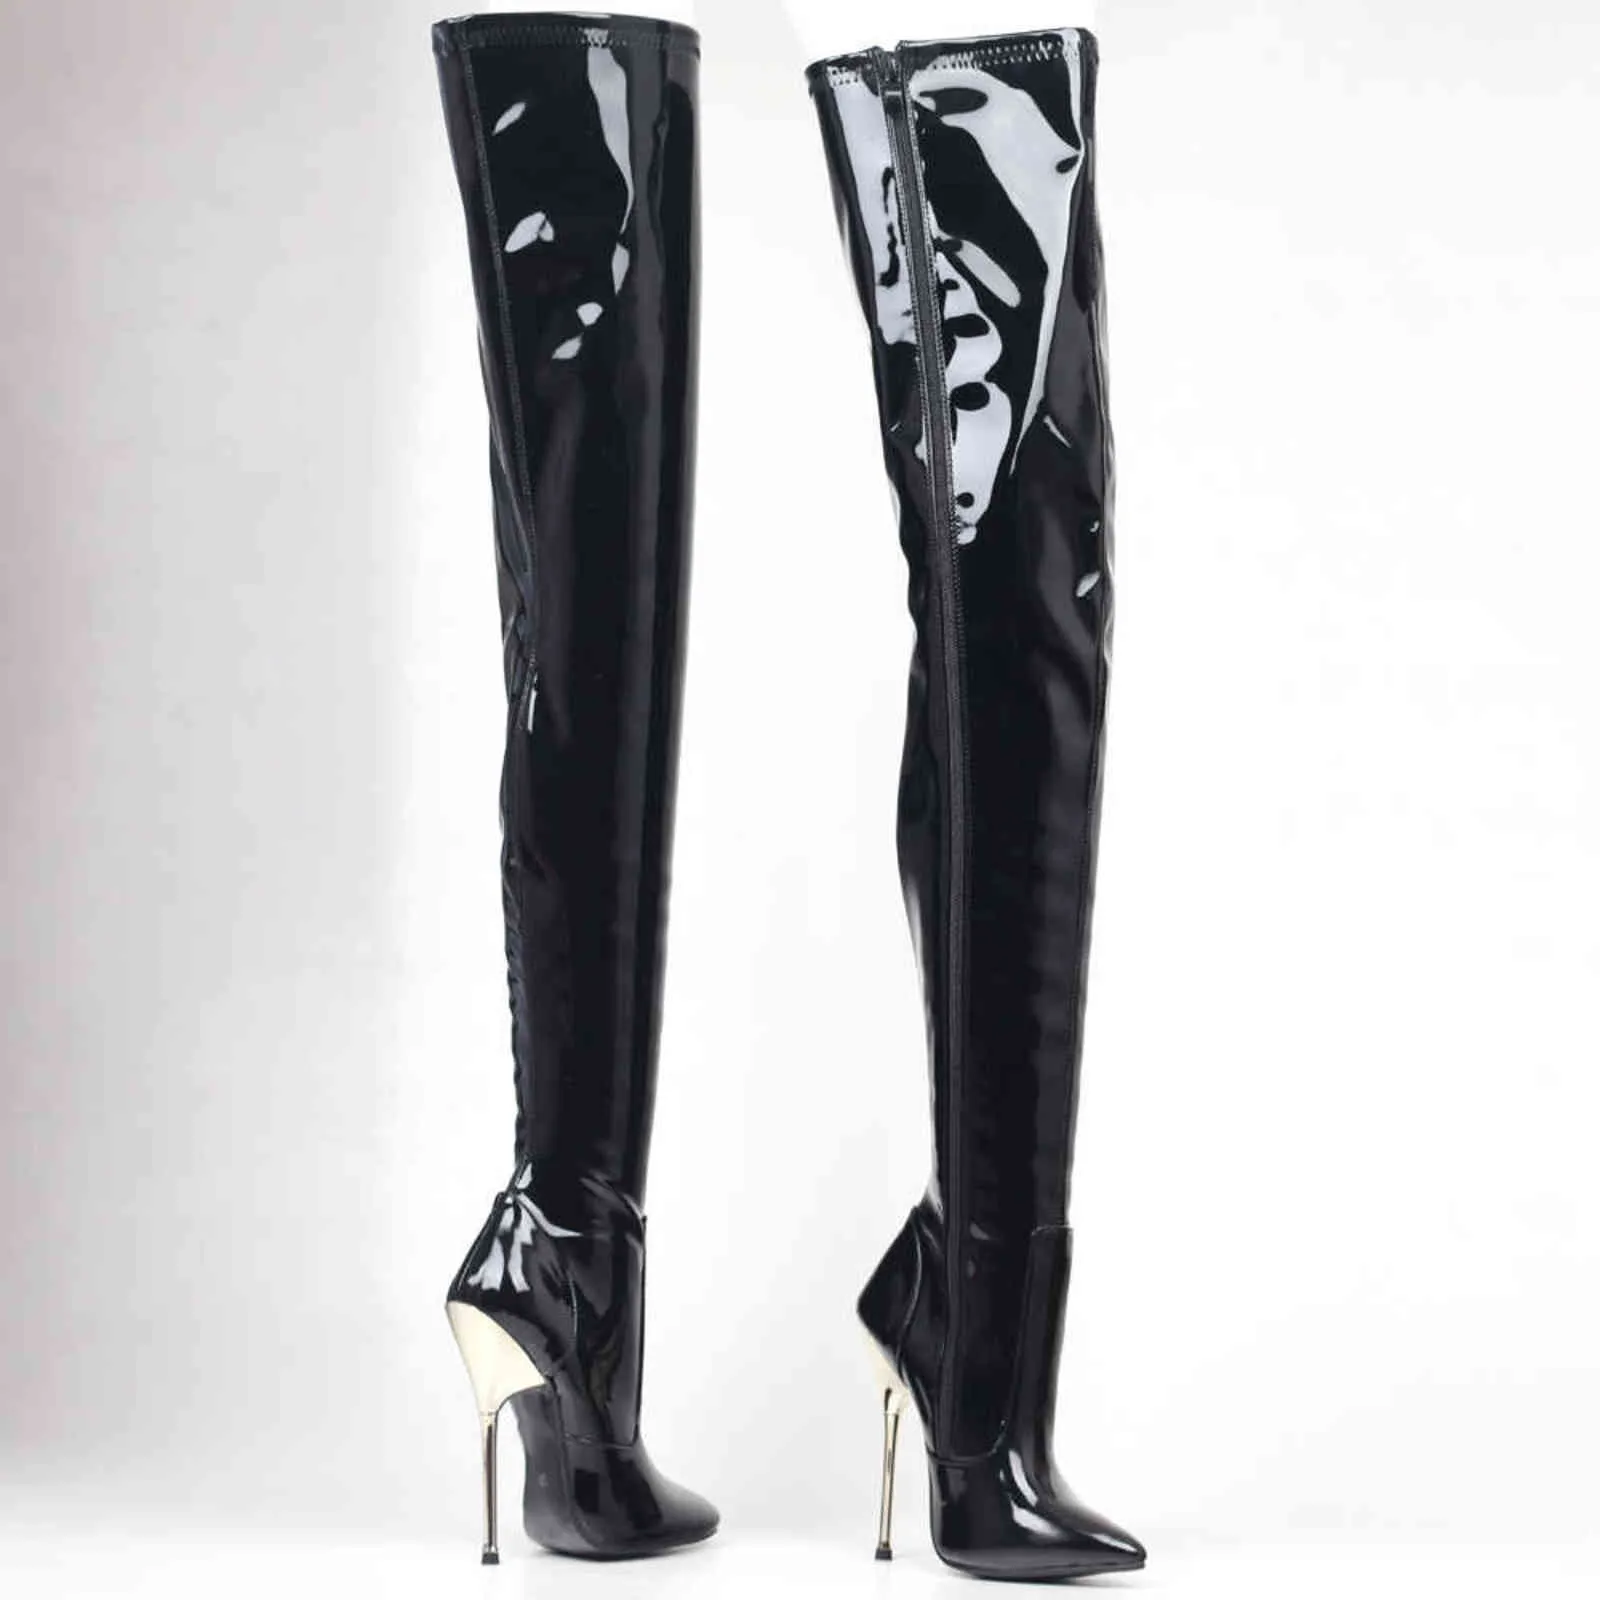 JIALUOWEI 36-46 Big Size PU leather thigh high boots 14cm high heel pointed toe over the knee long boots in stock fast shipping H1123